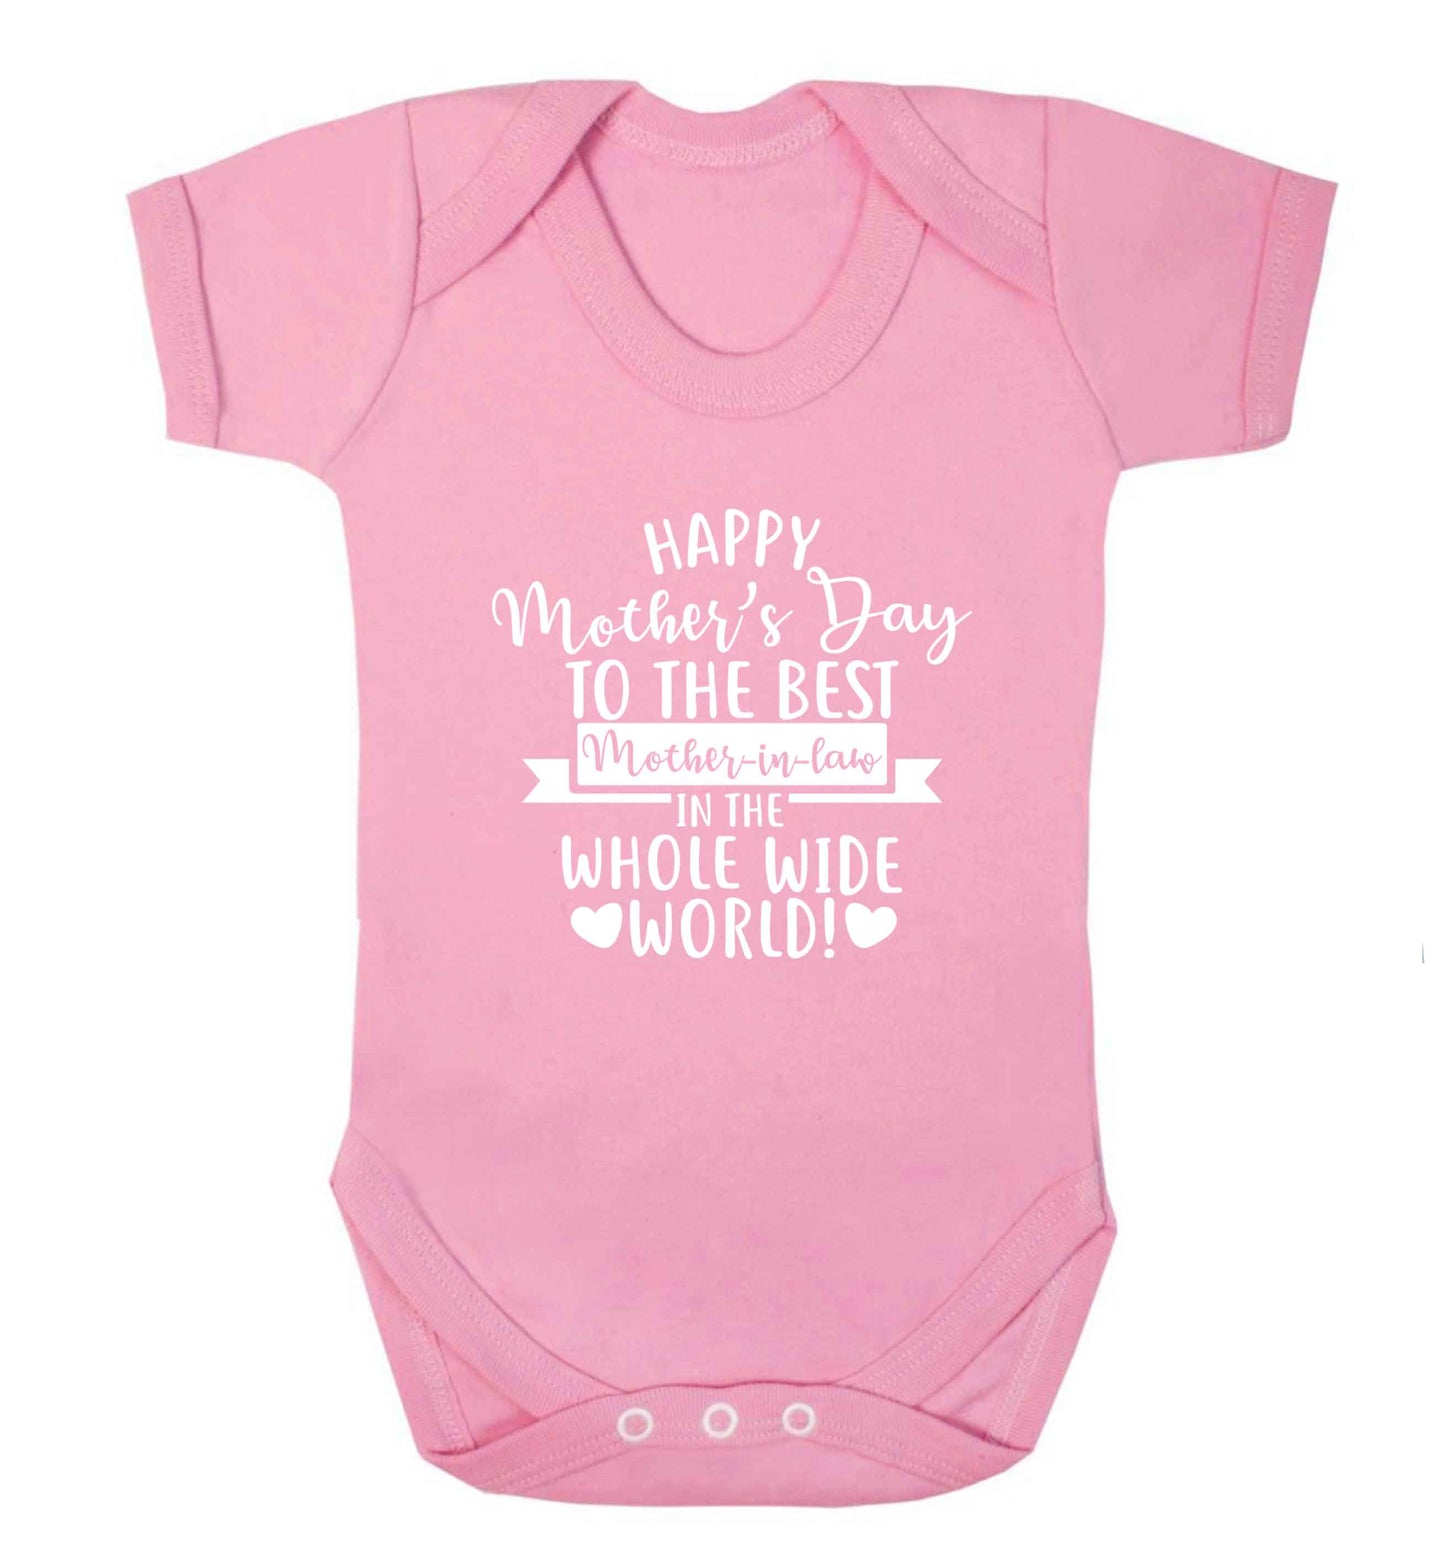 Happy mother's day to the best mother-in law in the world baby vest pale pink 18-24 months